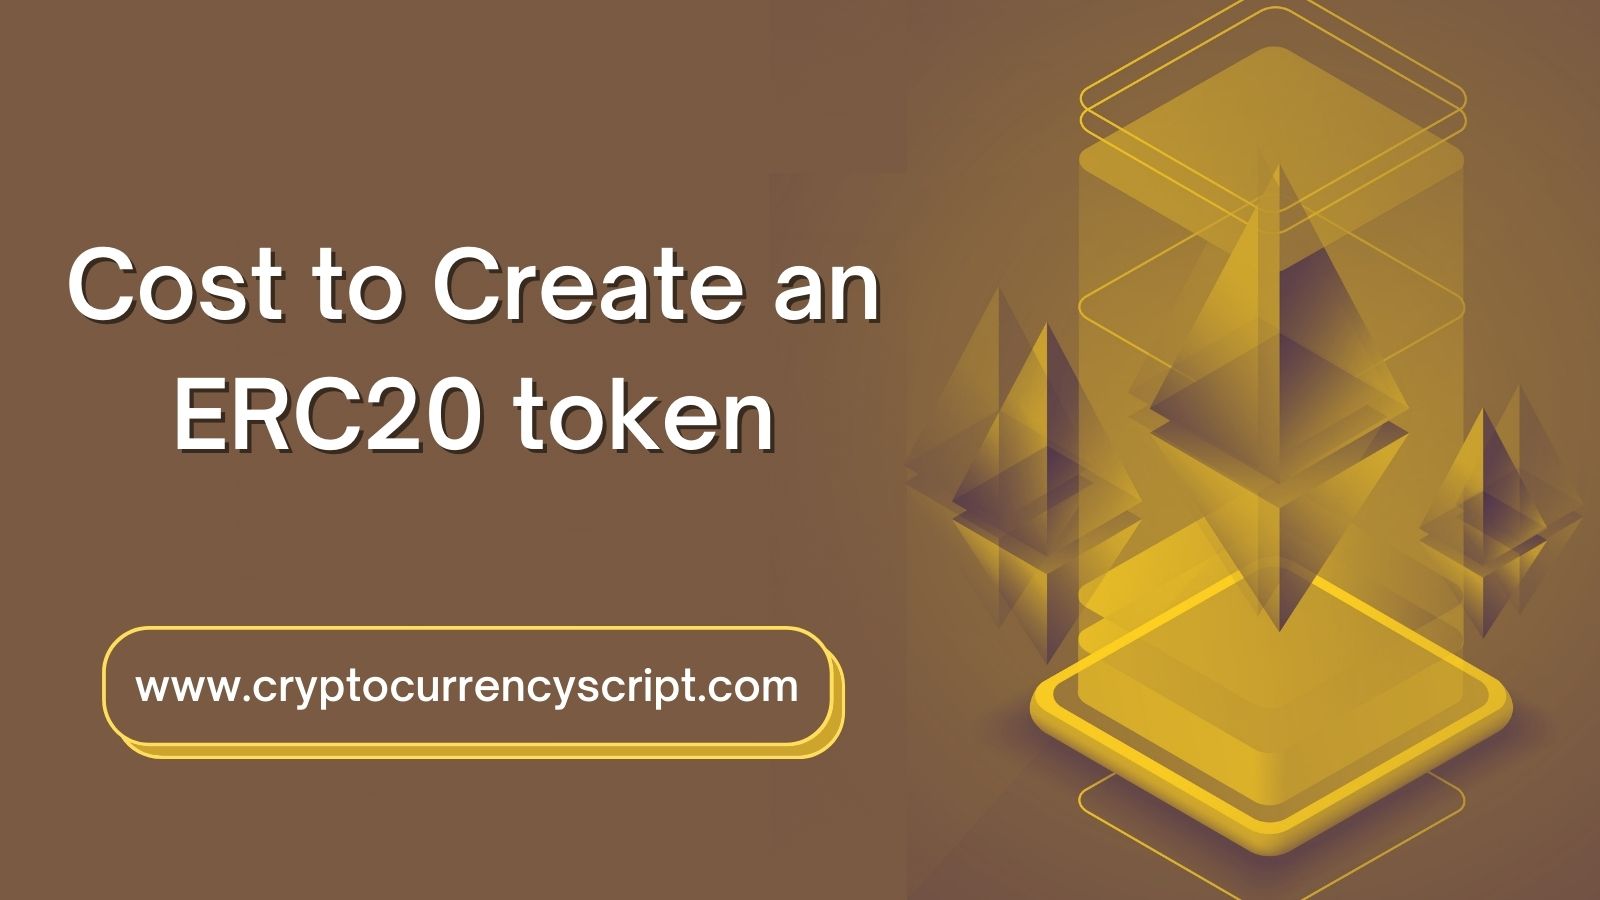 What is the ERC20 token? How much does it cost to create an ERC20 token?